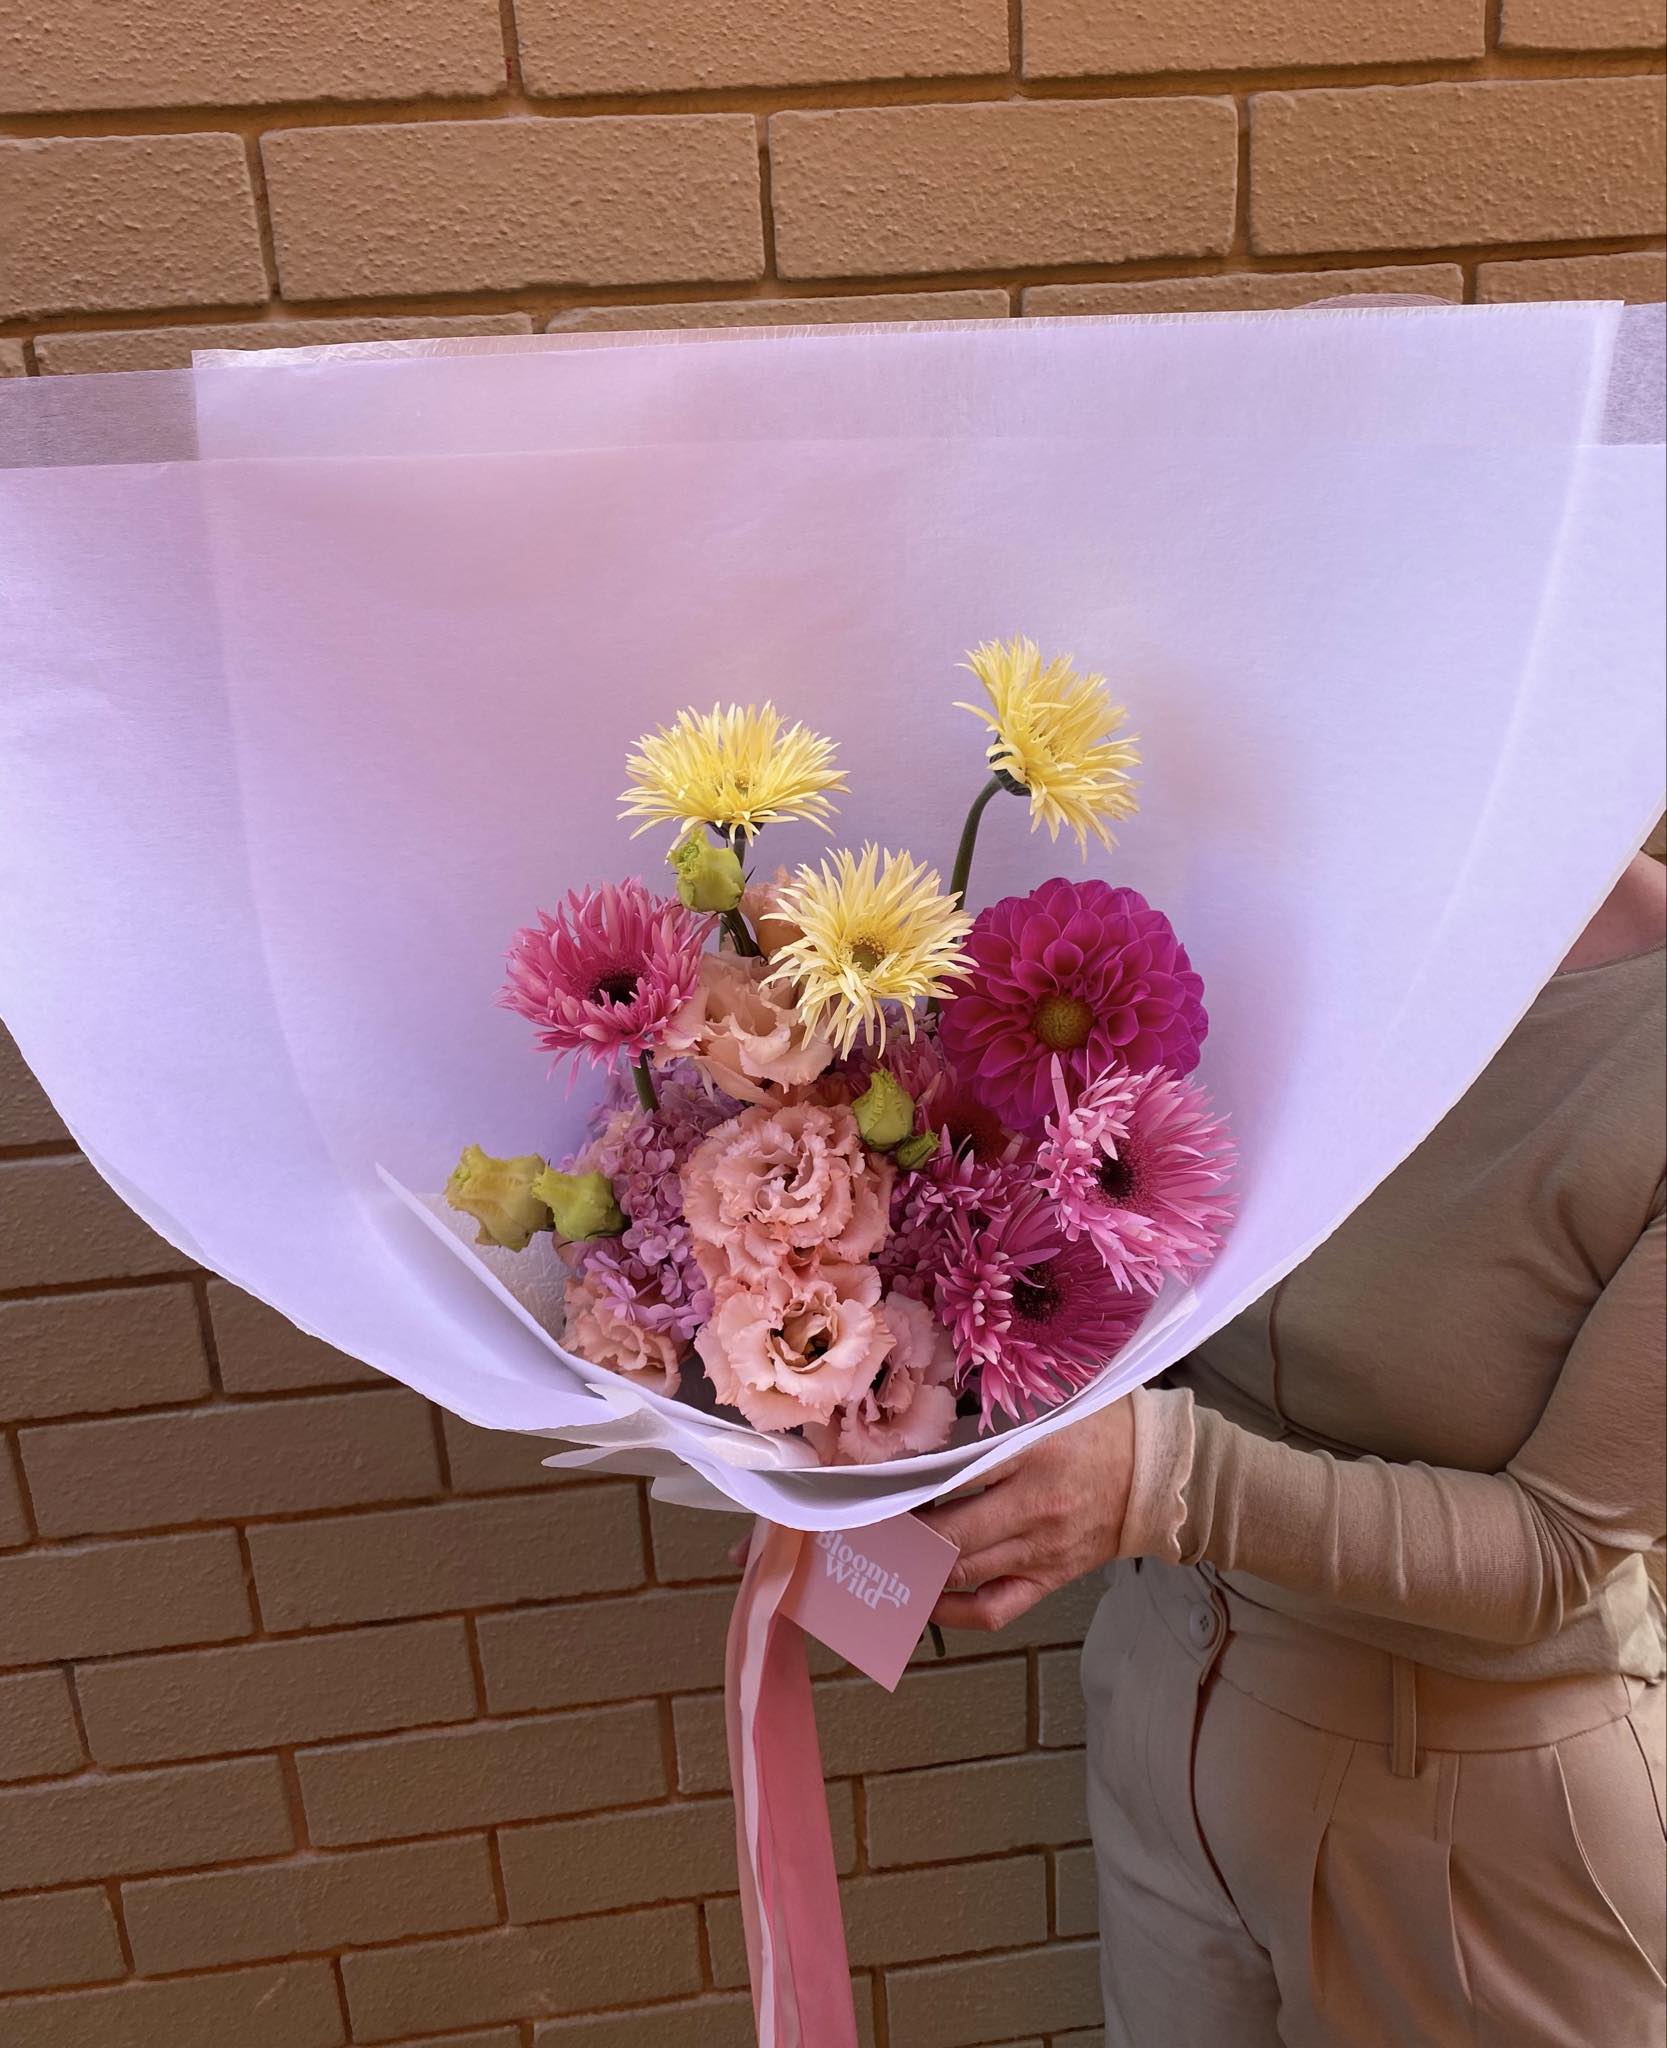 Frankie Loves - MOTHER'S DAY FLOWER DELIVERY PERTH SUNDAY 12TH MAY